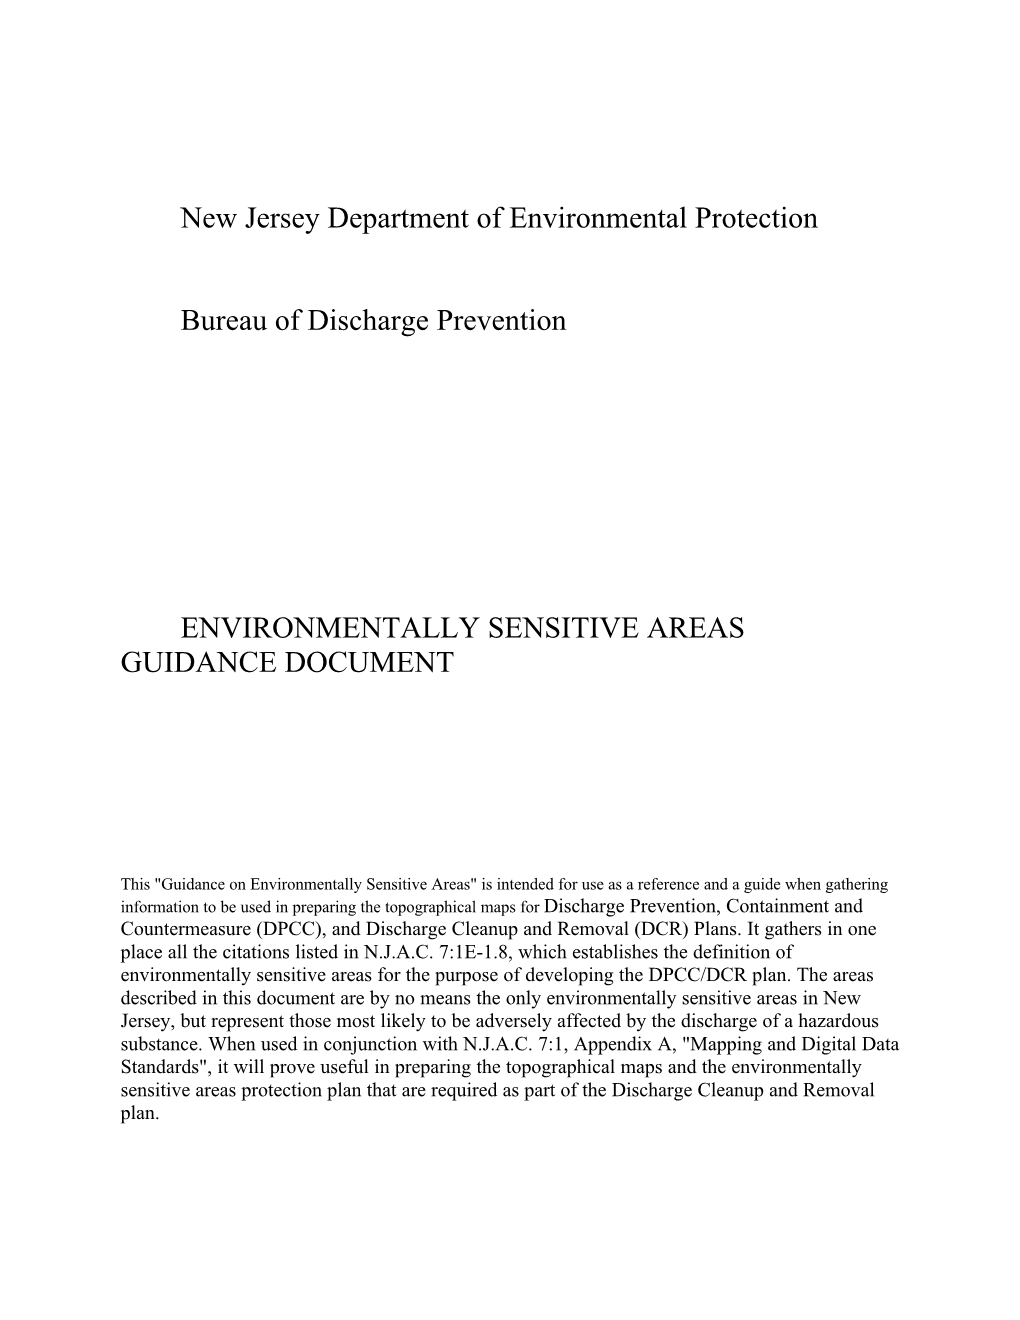 New Jersey Department of Environmental Protection Bureau Of